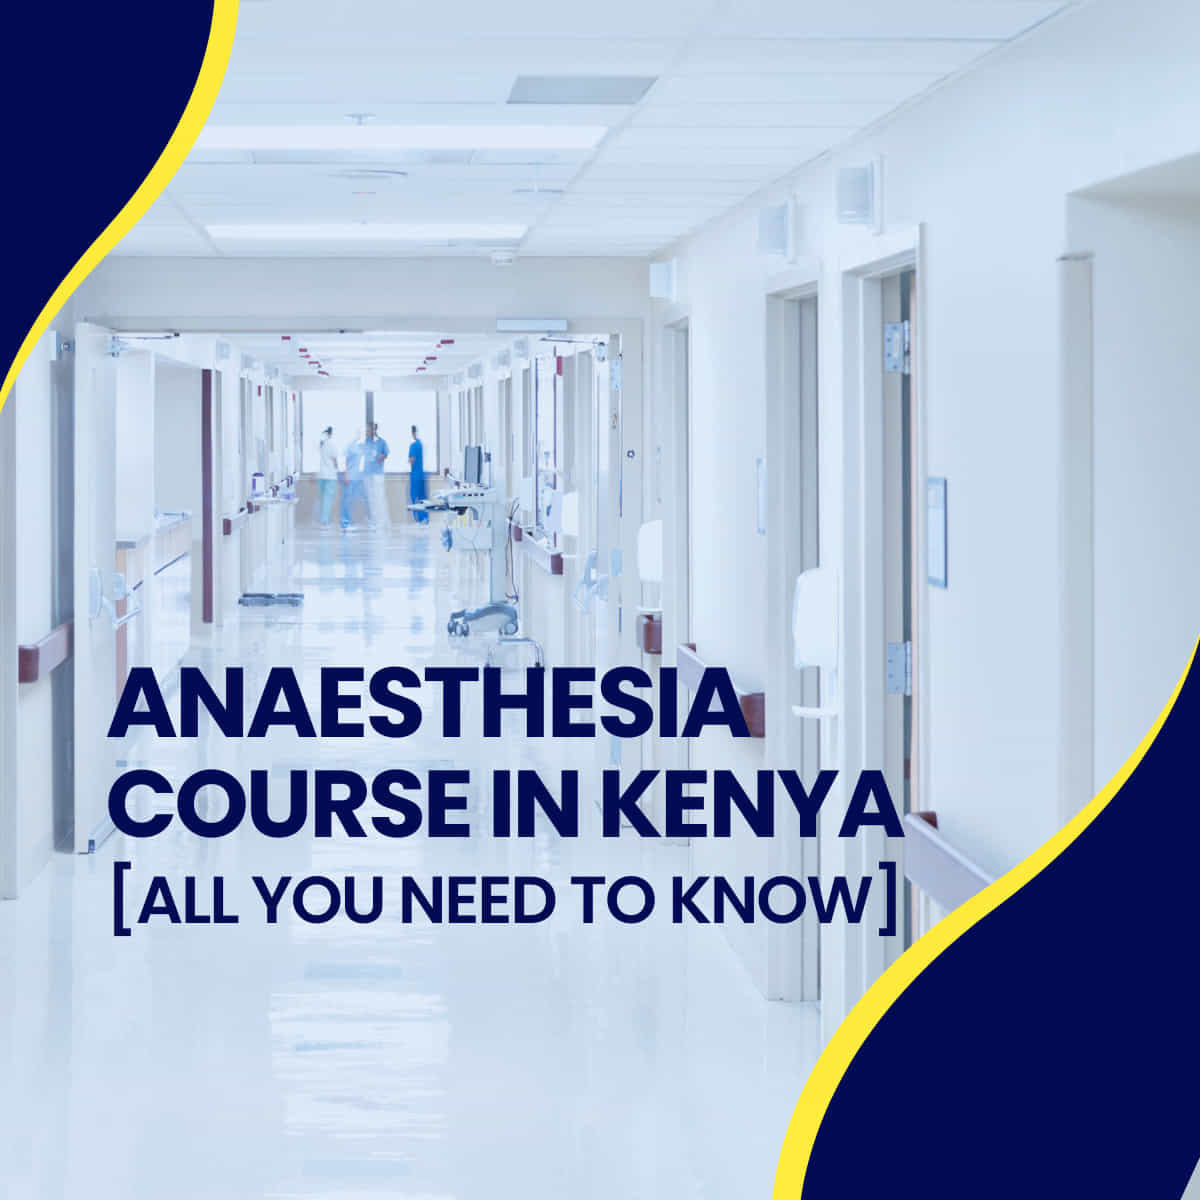 Anaesthesia course in Kenya